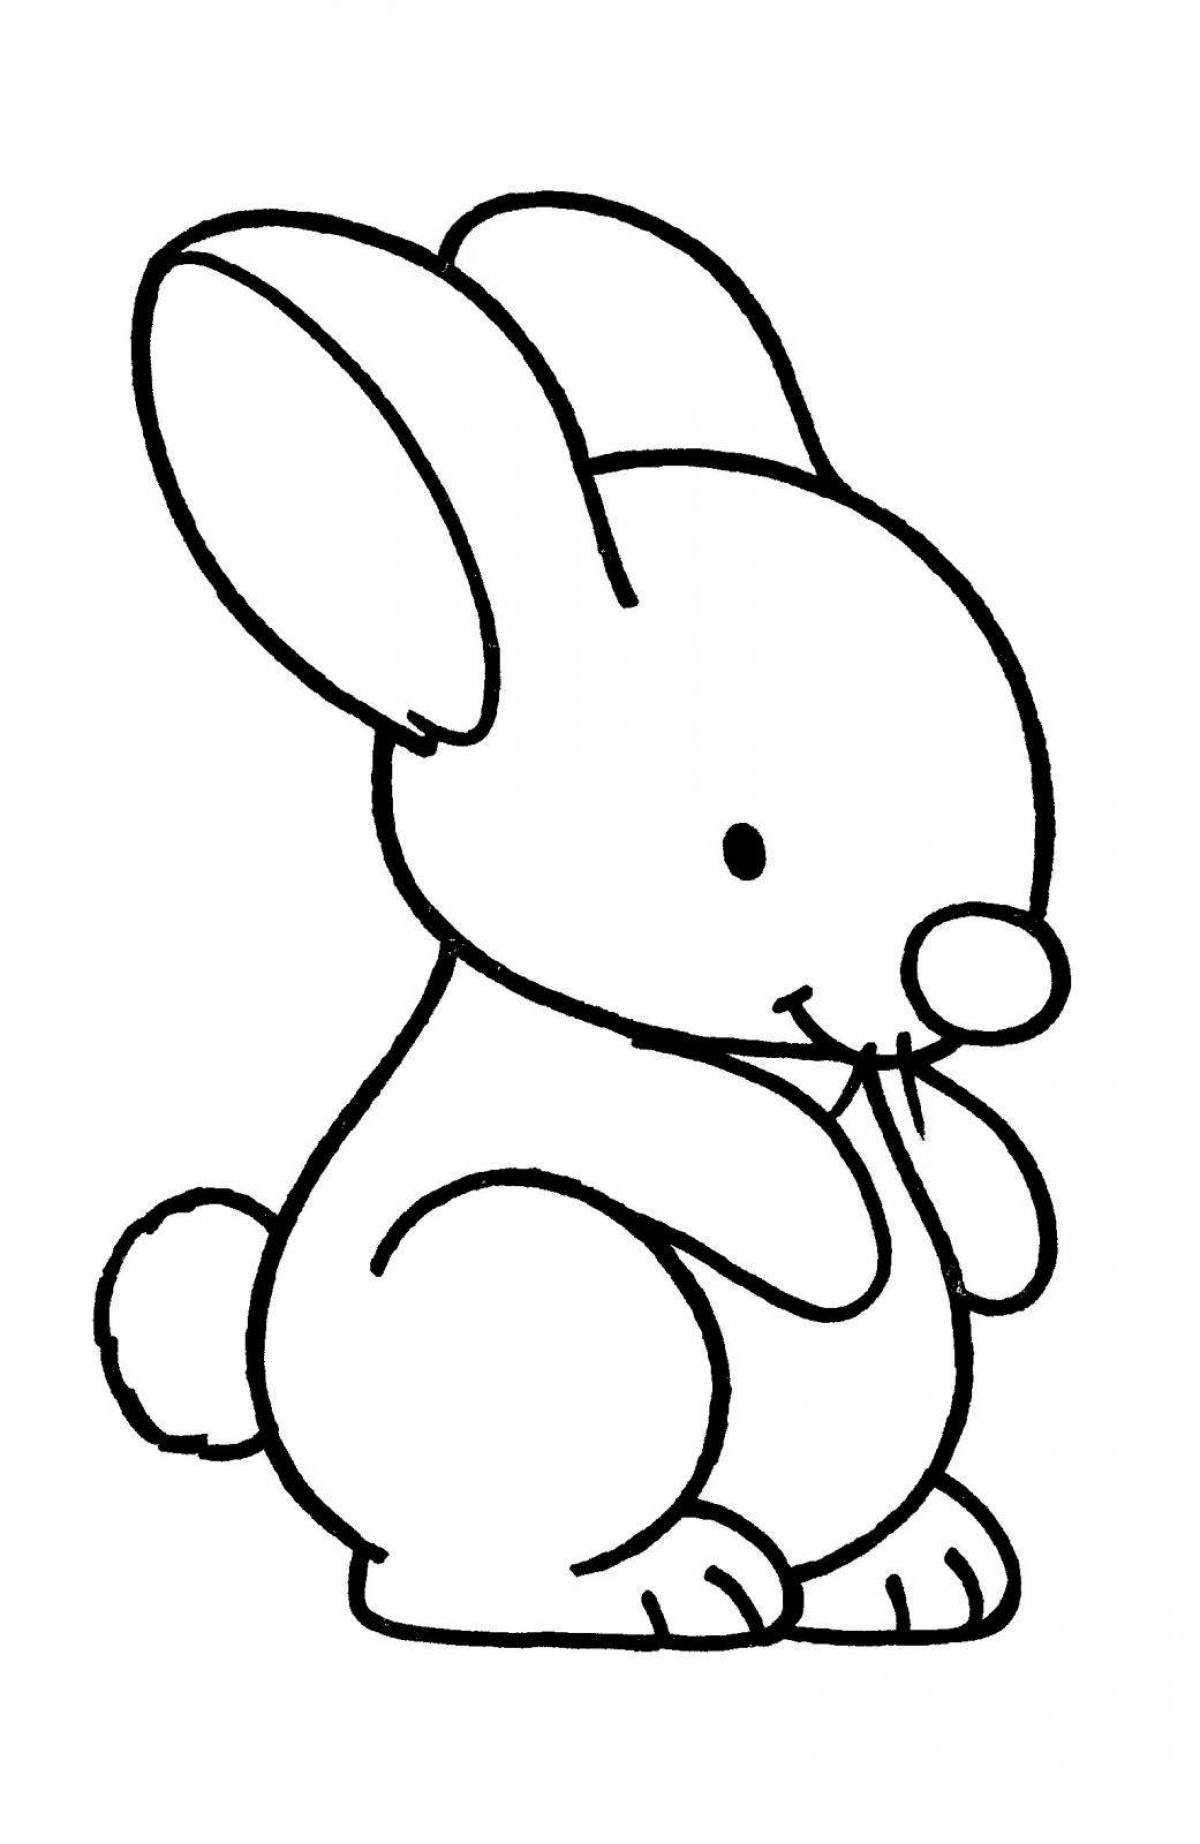 Great rabbit coloring book for kids 3-4 years old